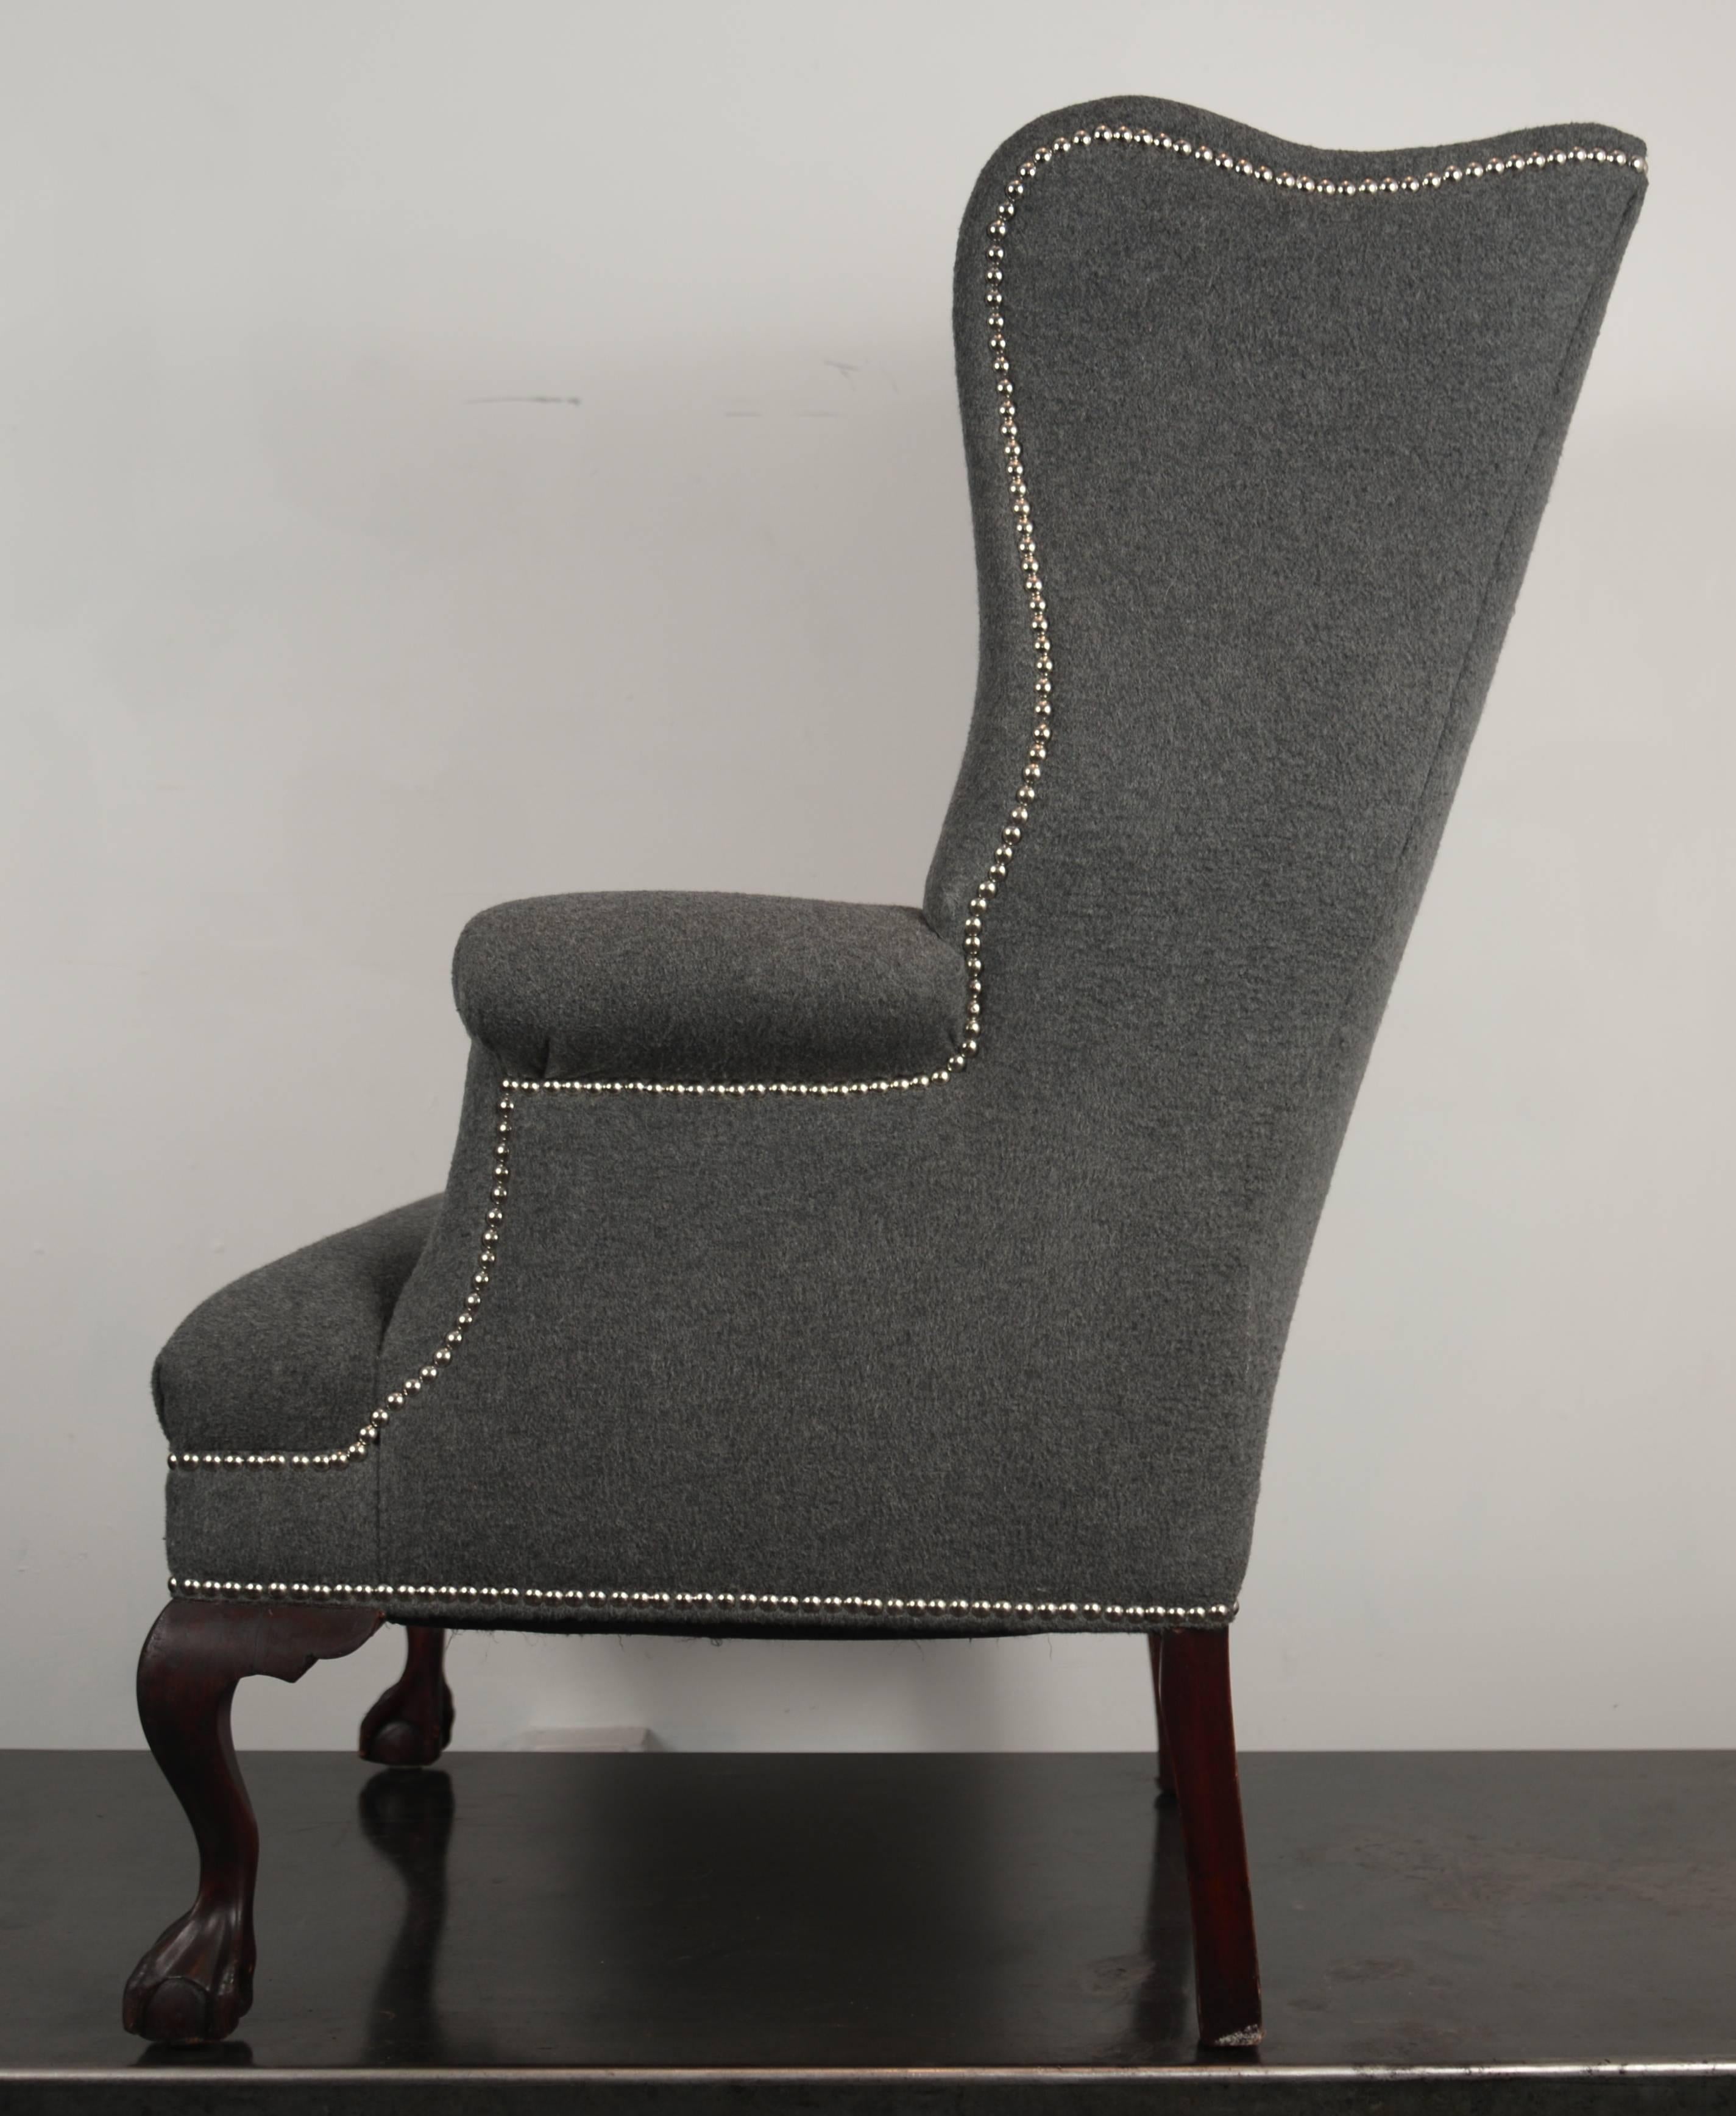 Fully restored 19th century stylized wingback chairs upholstered in gray wool and cashmere fabric and outlined in nickel nailhead trim.